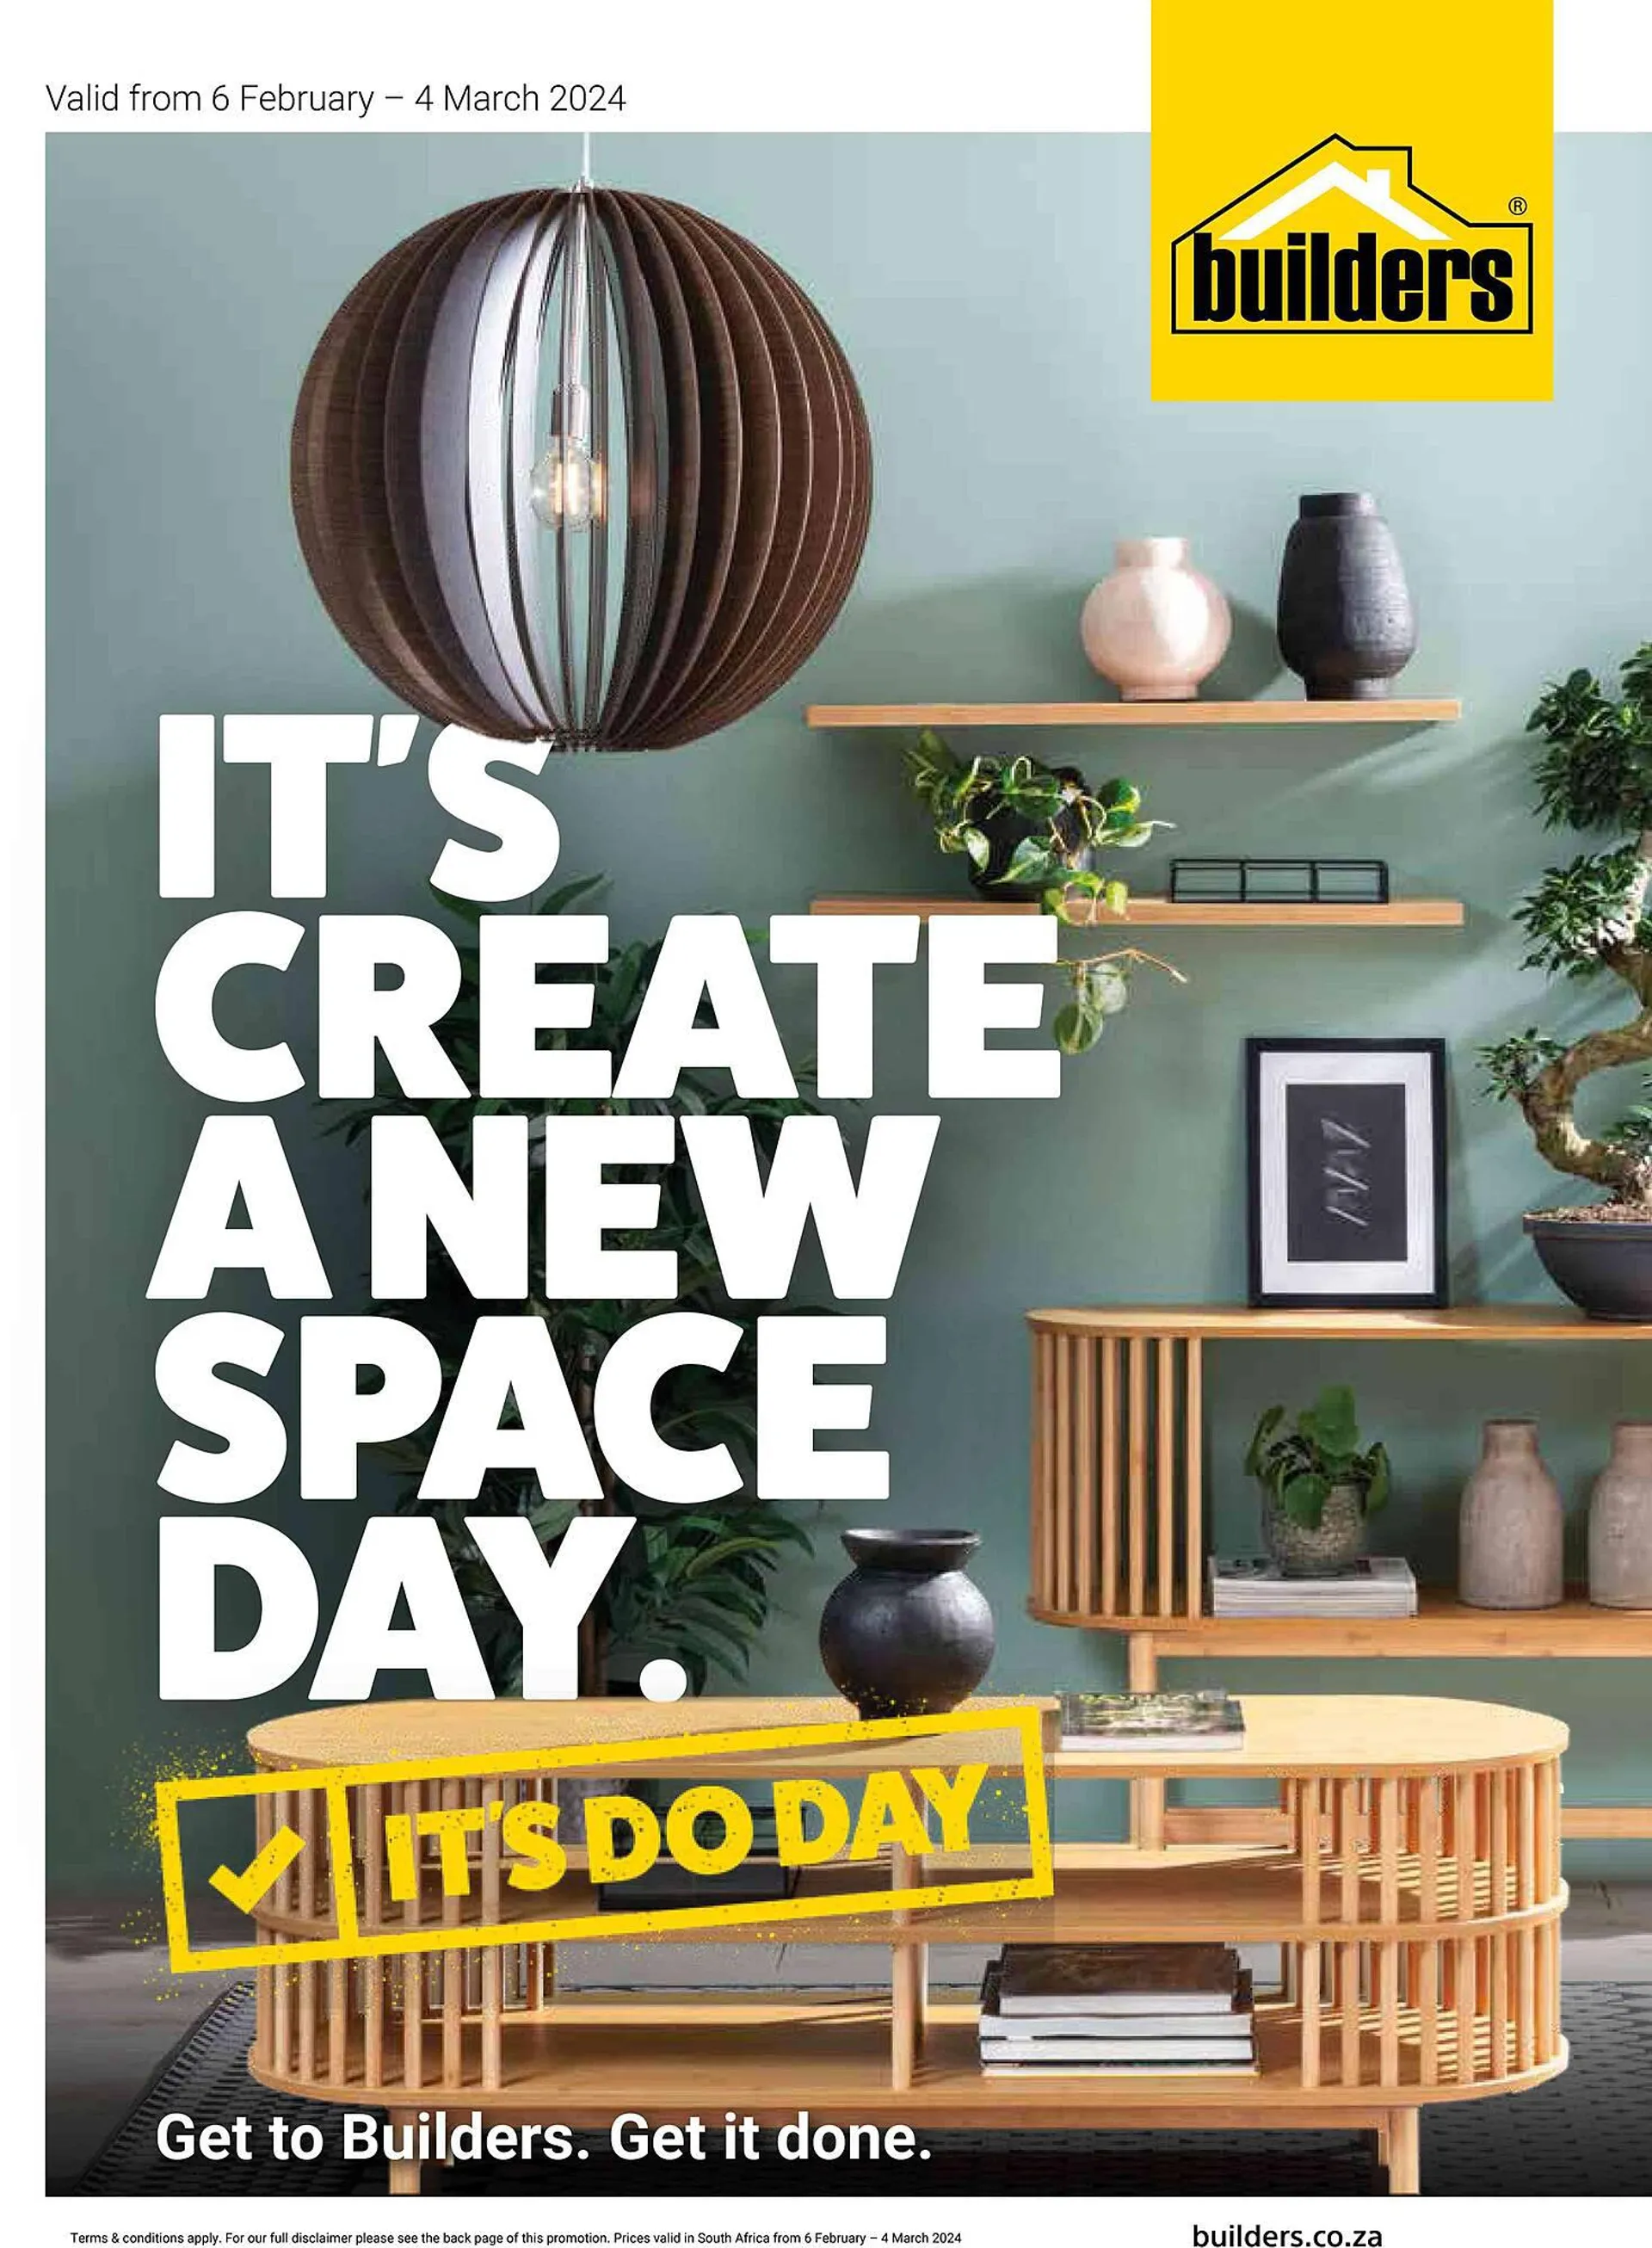 Builders Warehouse catalogue - 6 February 4 March 2024 - Page 1